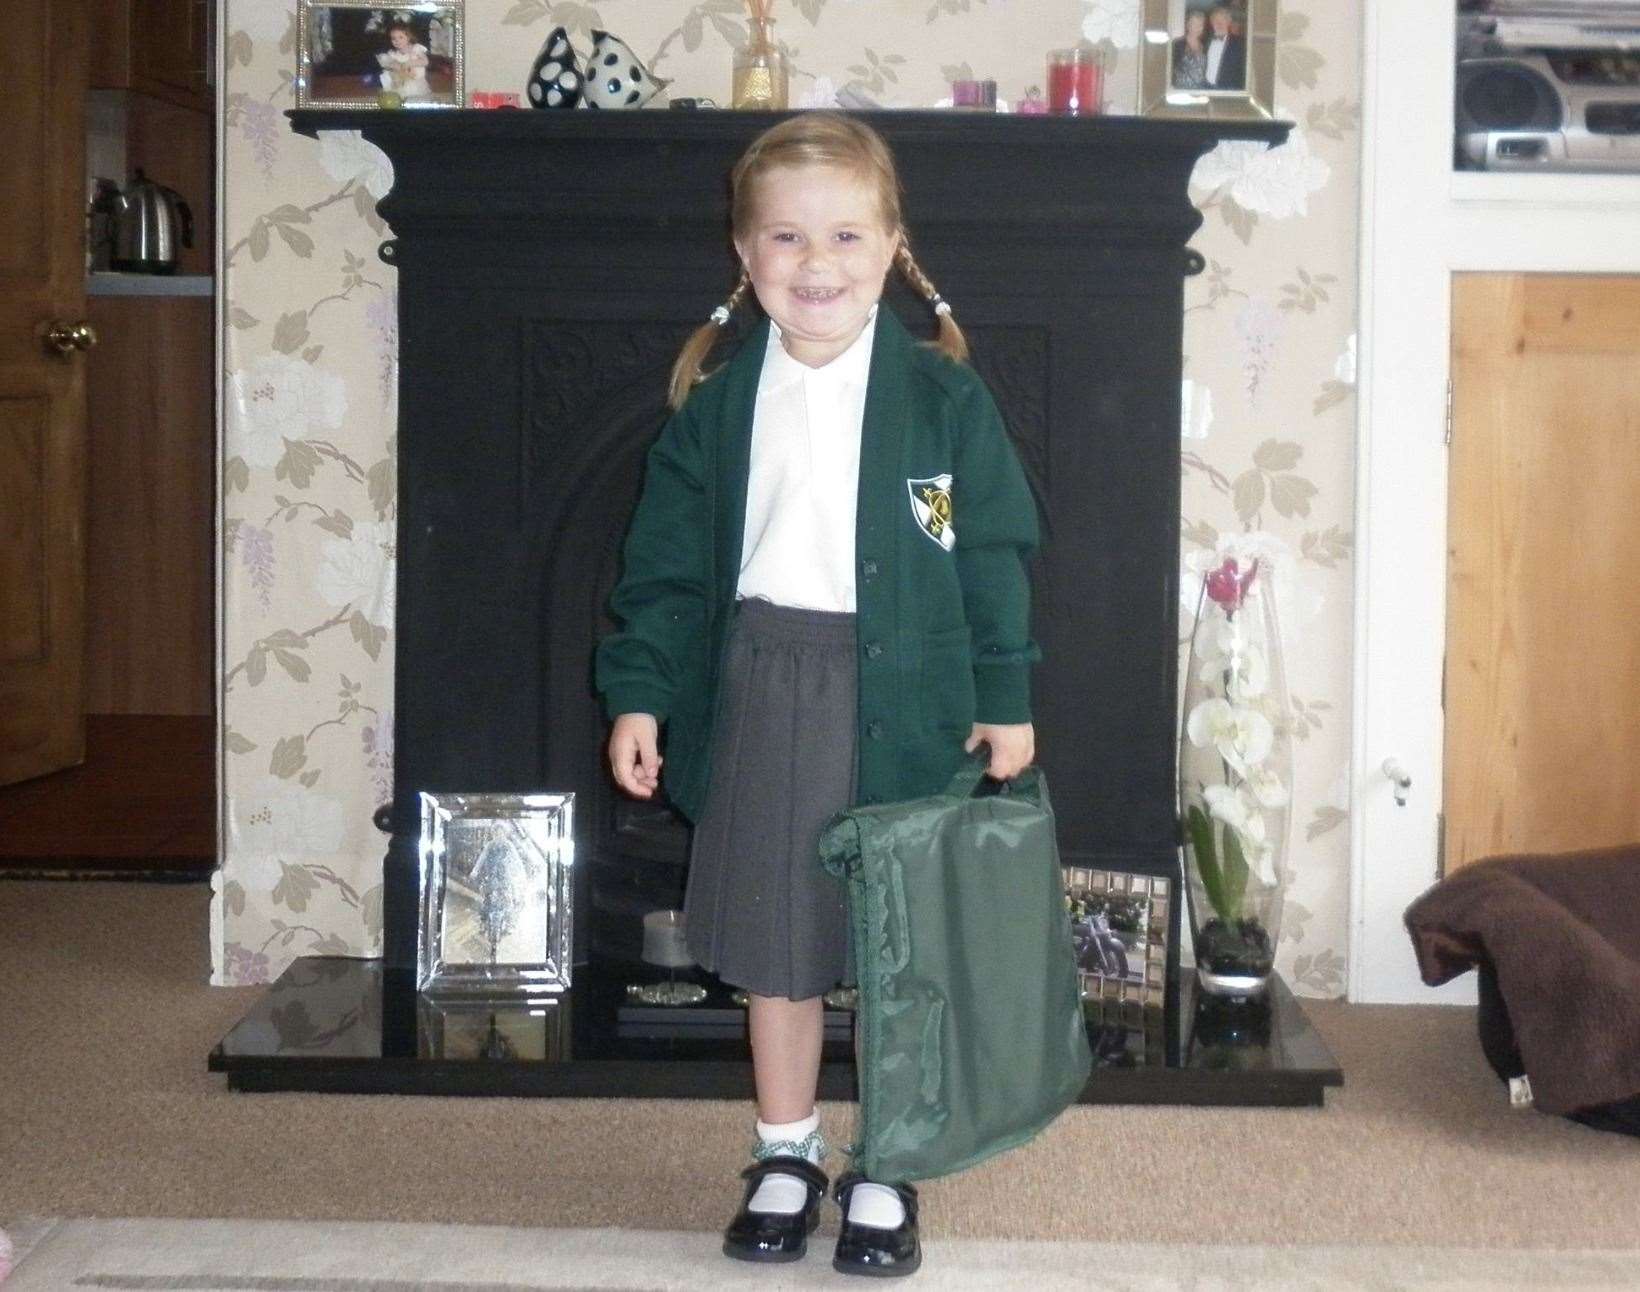 Lilly Beckett's first day at primary school - a feat made possible by her liver-donor dad from Margate